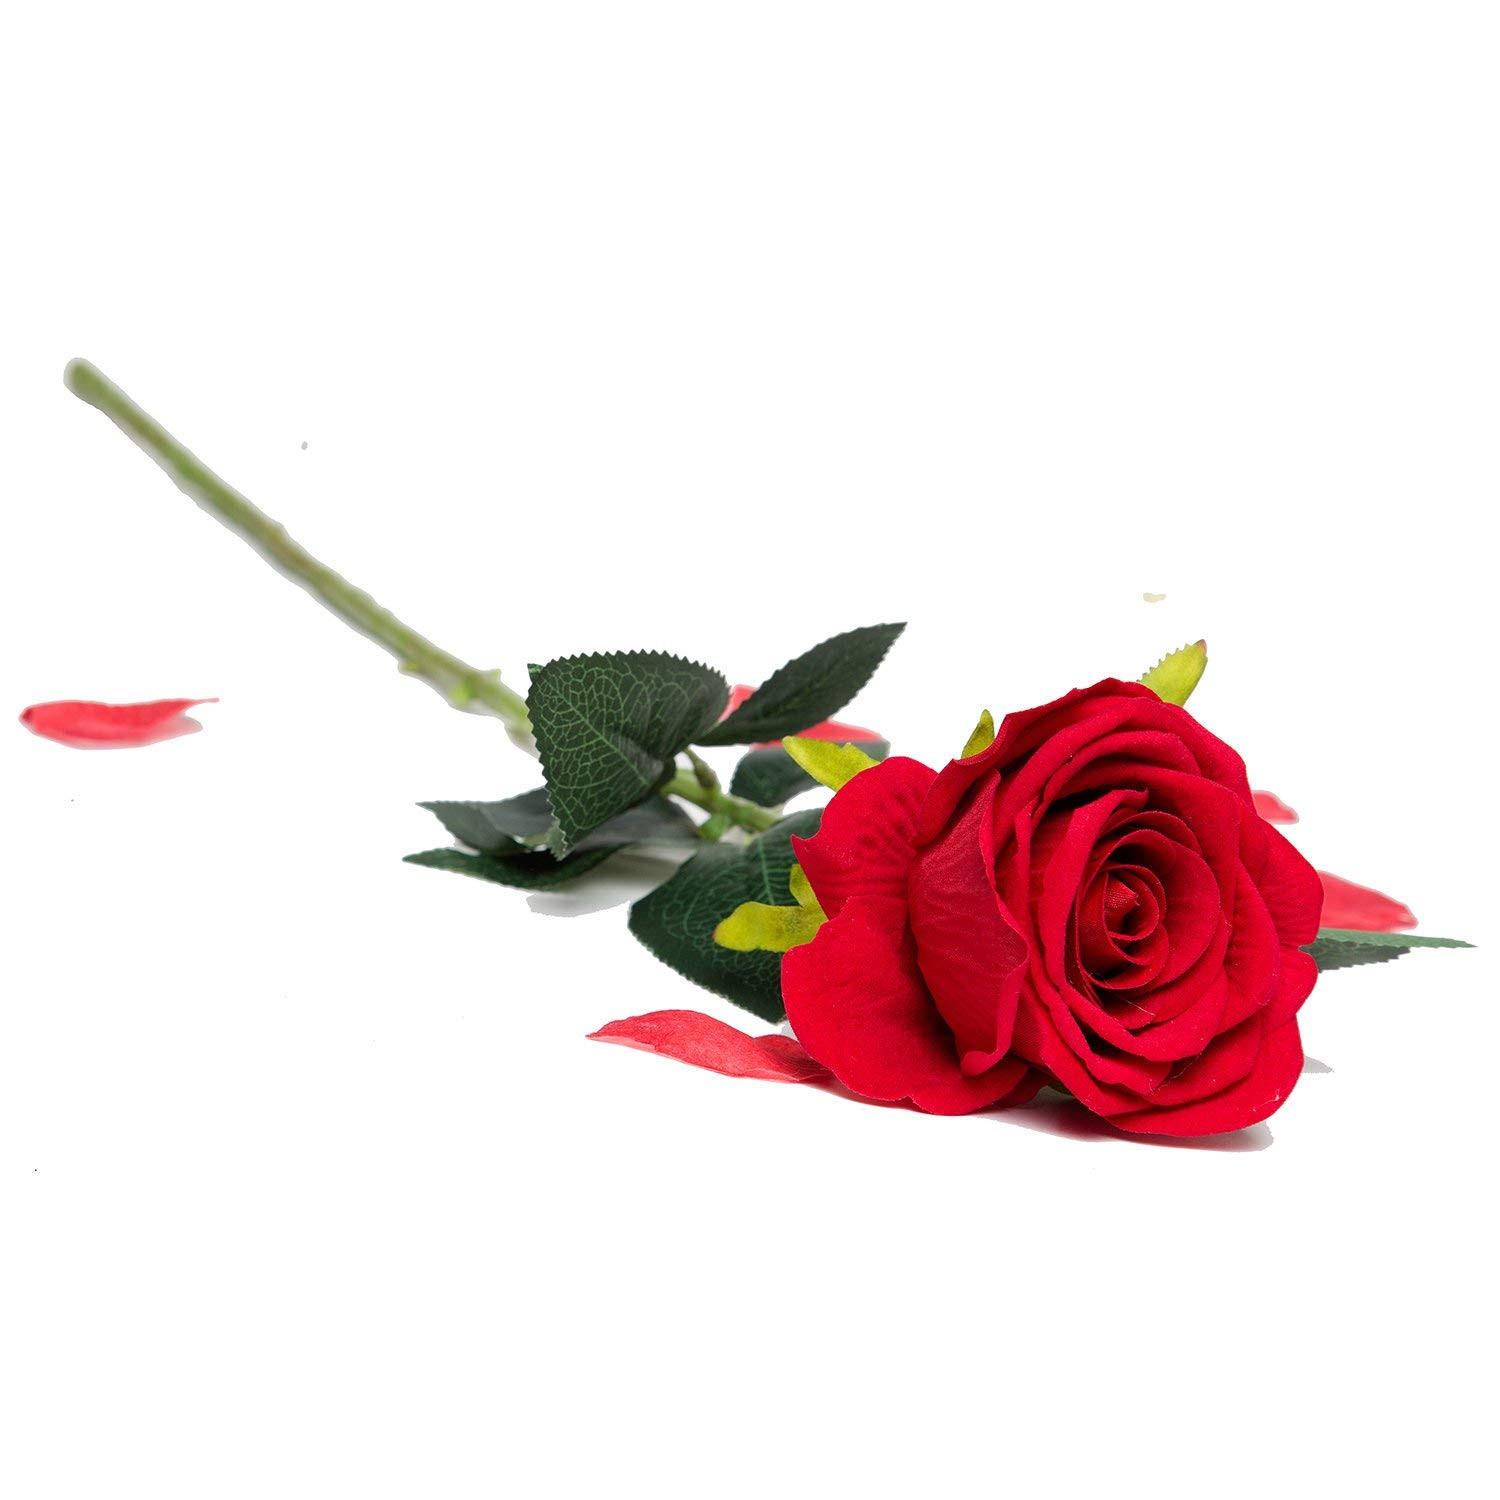 28 Perfect Single Rose Bud Vase 2024 free download single rose bud vase of amazon com artificial silk roses red velvet 30 long stemmed 1 with amazon com artificial silk roses red velvet 30 long stemmed 1 dozen fake flowers for bouquets weddi